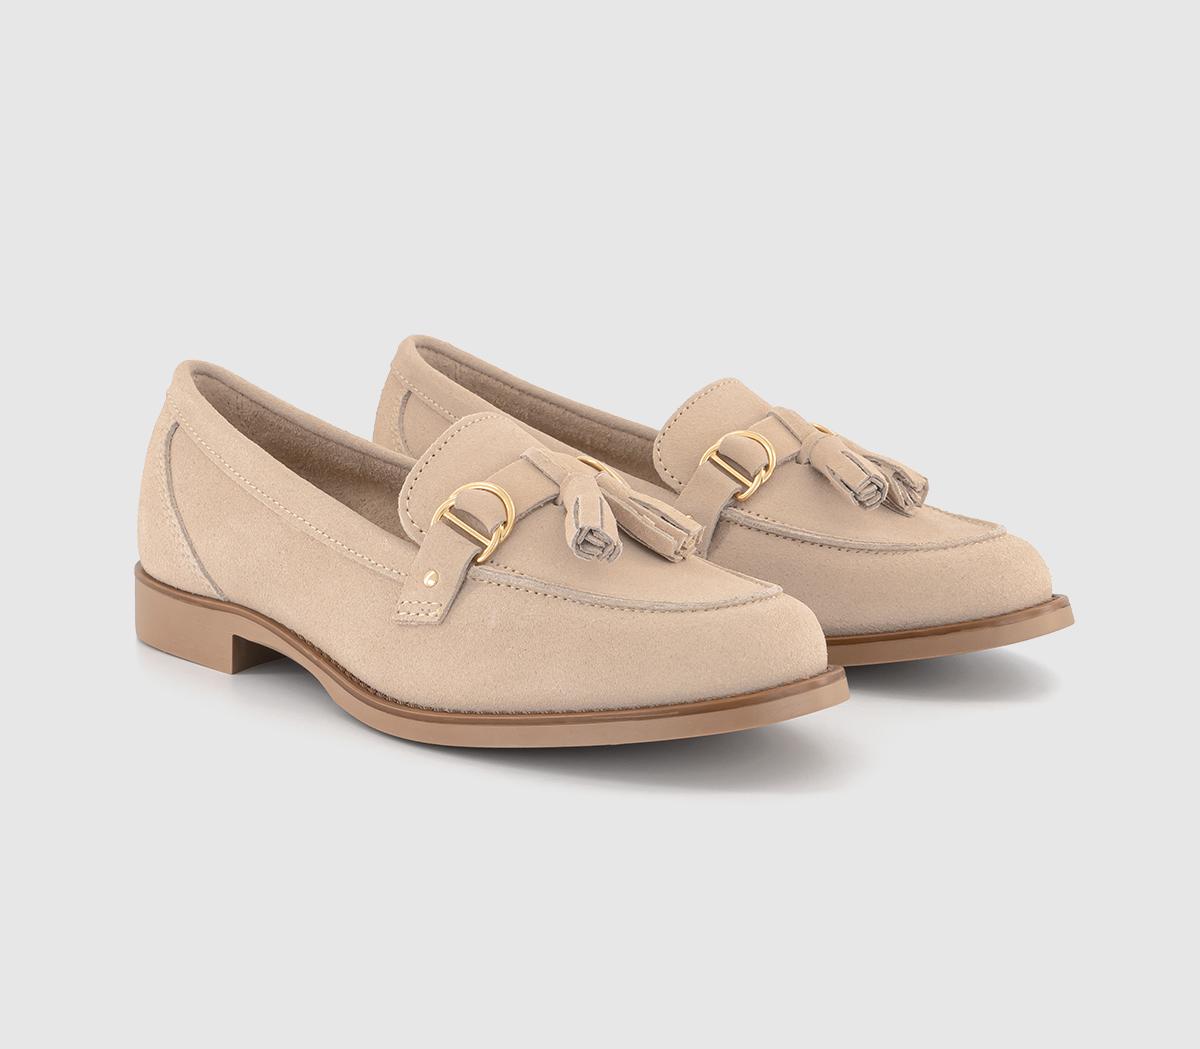 OFFICE Womens Feels Leather Trim Tassel Loafers Blush Suede Natural, 6